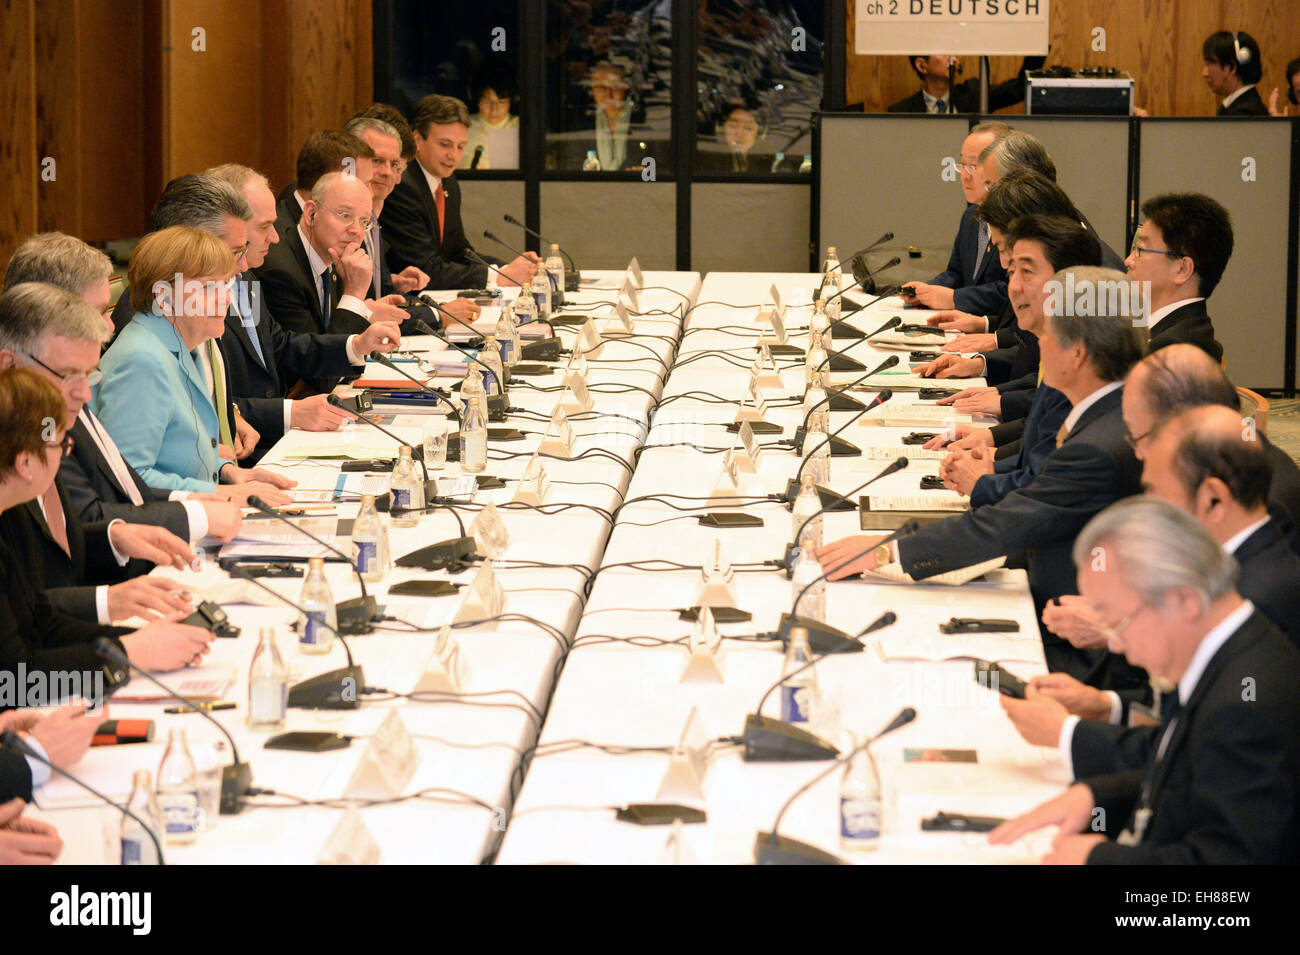 Tokyo, Japan. 9th Mar, 2015. Germany's Chancellor Angela Merkel (4th L) and Japan's Prime Minister Shinzo Abe (5th R) take part in a meeting with German and Japanese business leaders in Tokyo, Japan, March 9, 2015. © Ma Ping/Xinhua/Alamy Live News Stock Photo